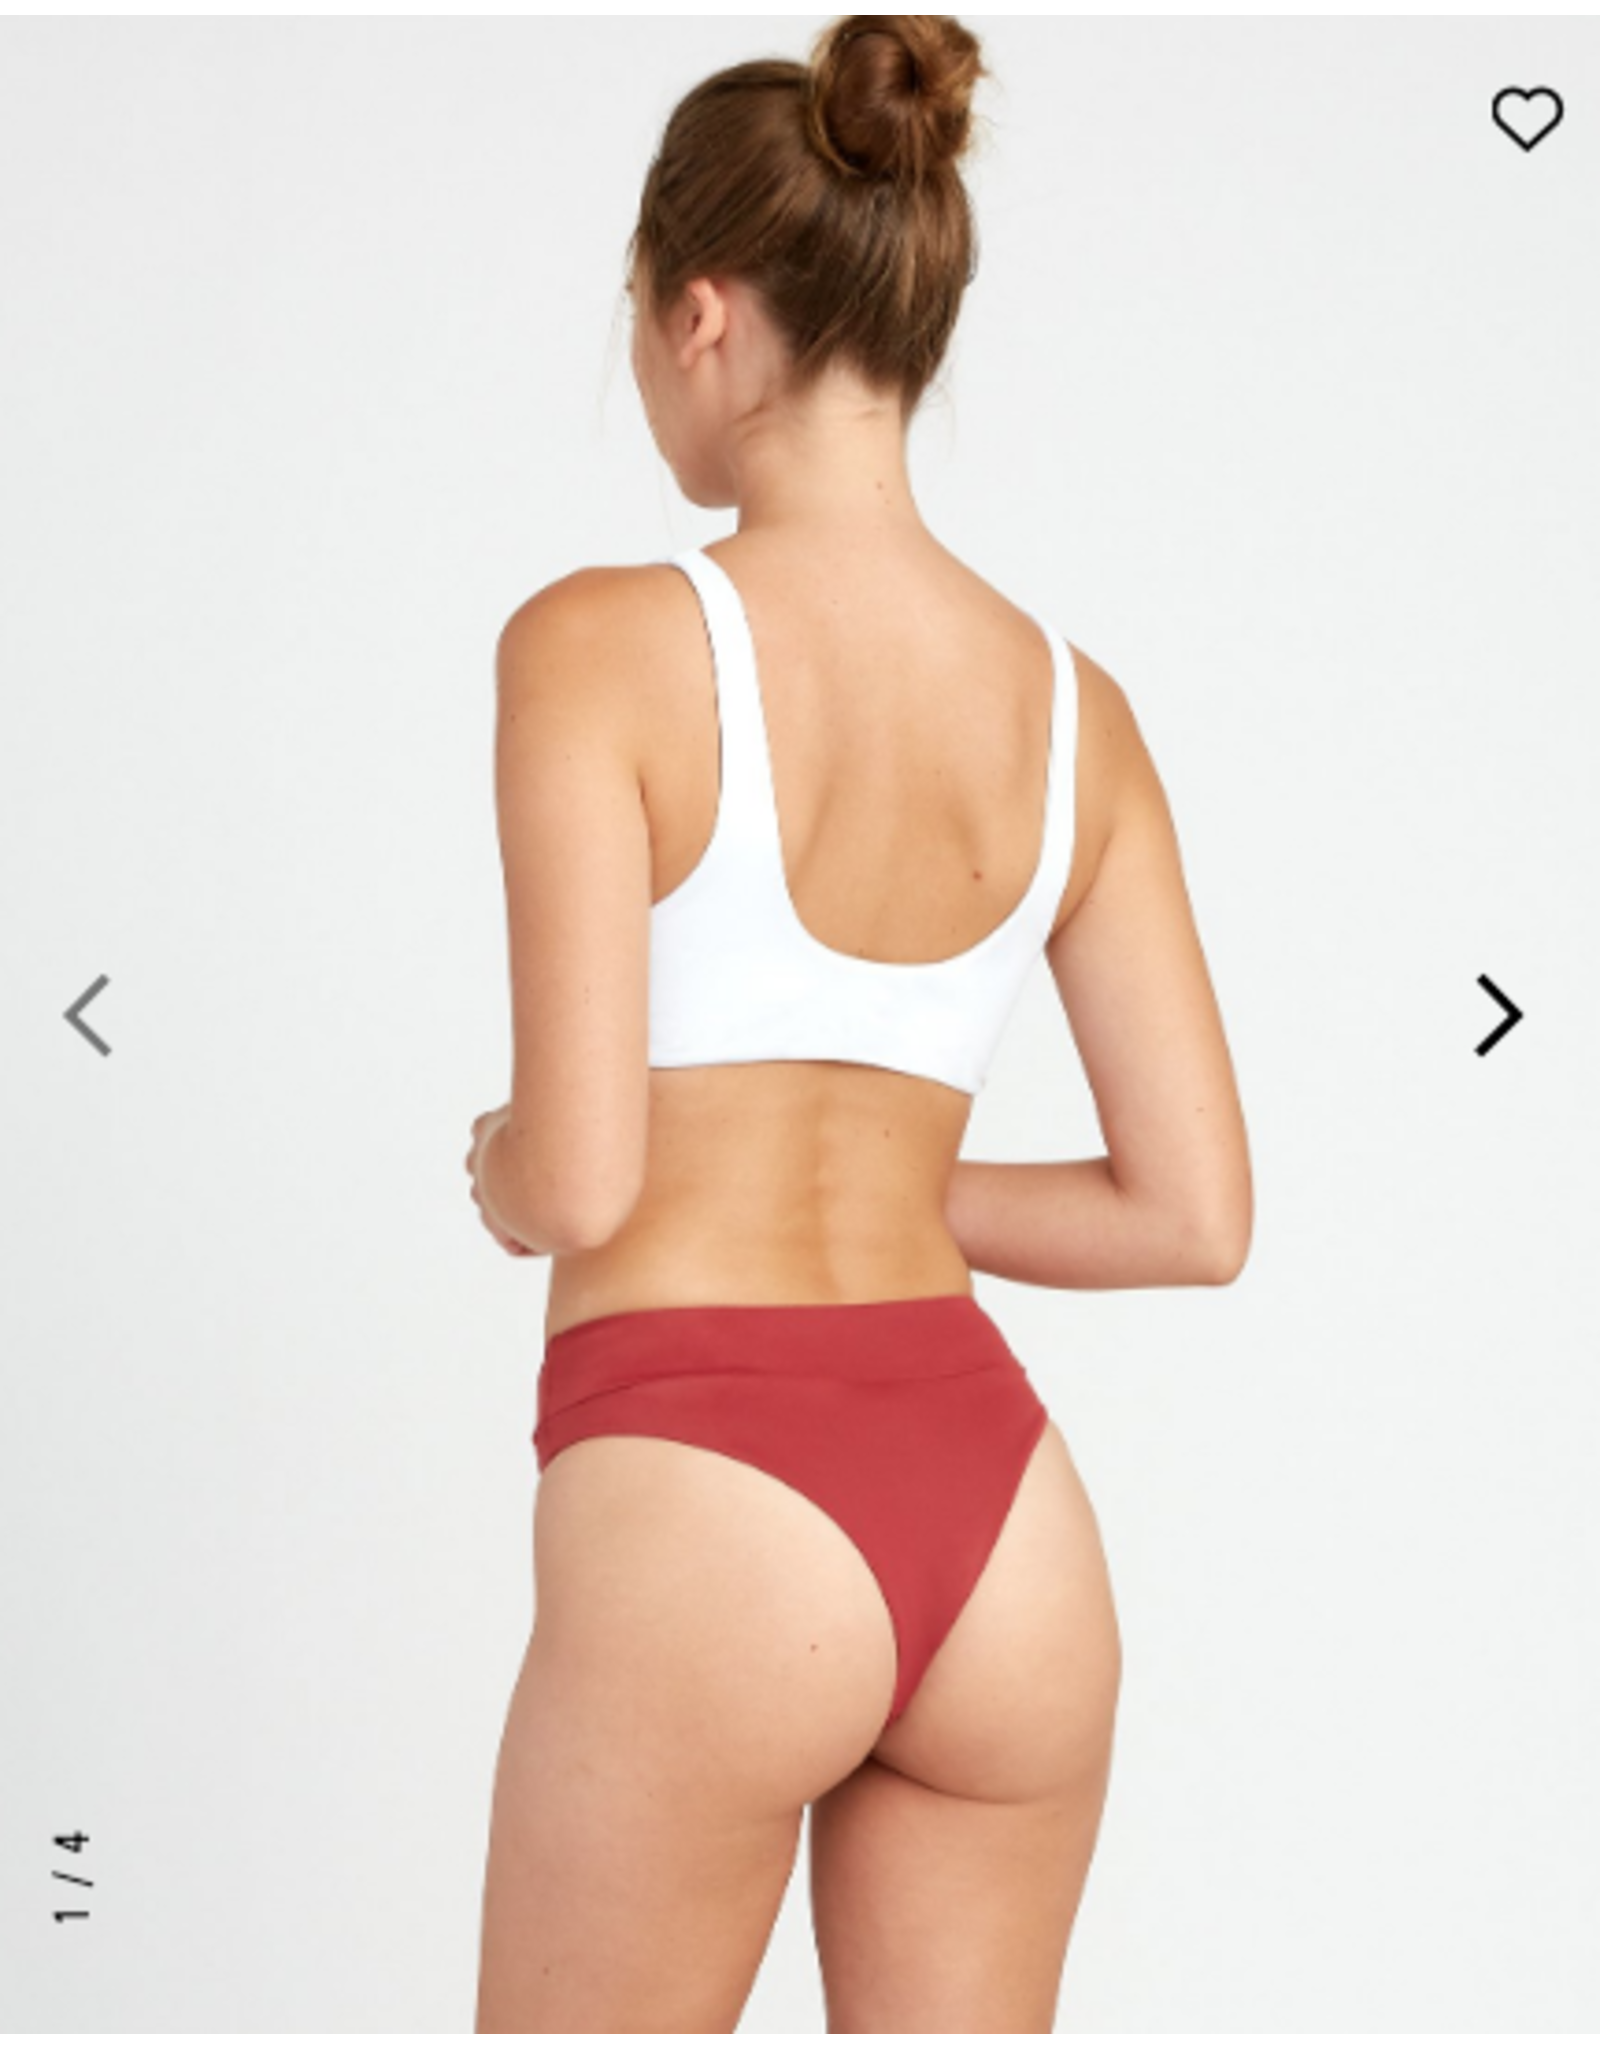 Solid High Rise - Cheeky Coverage Bikini Bottoms for Women